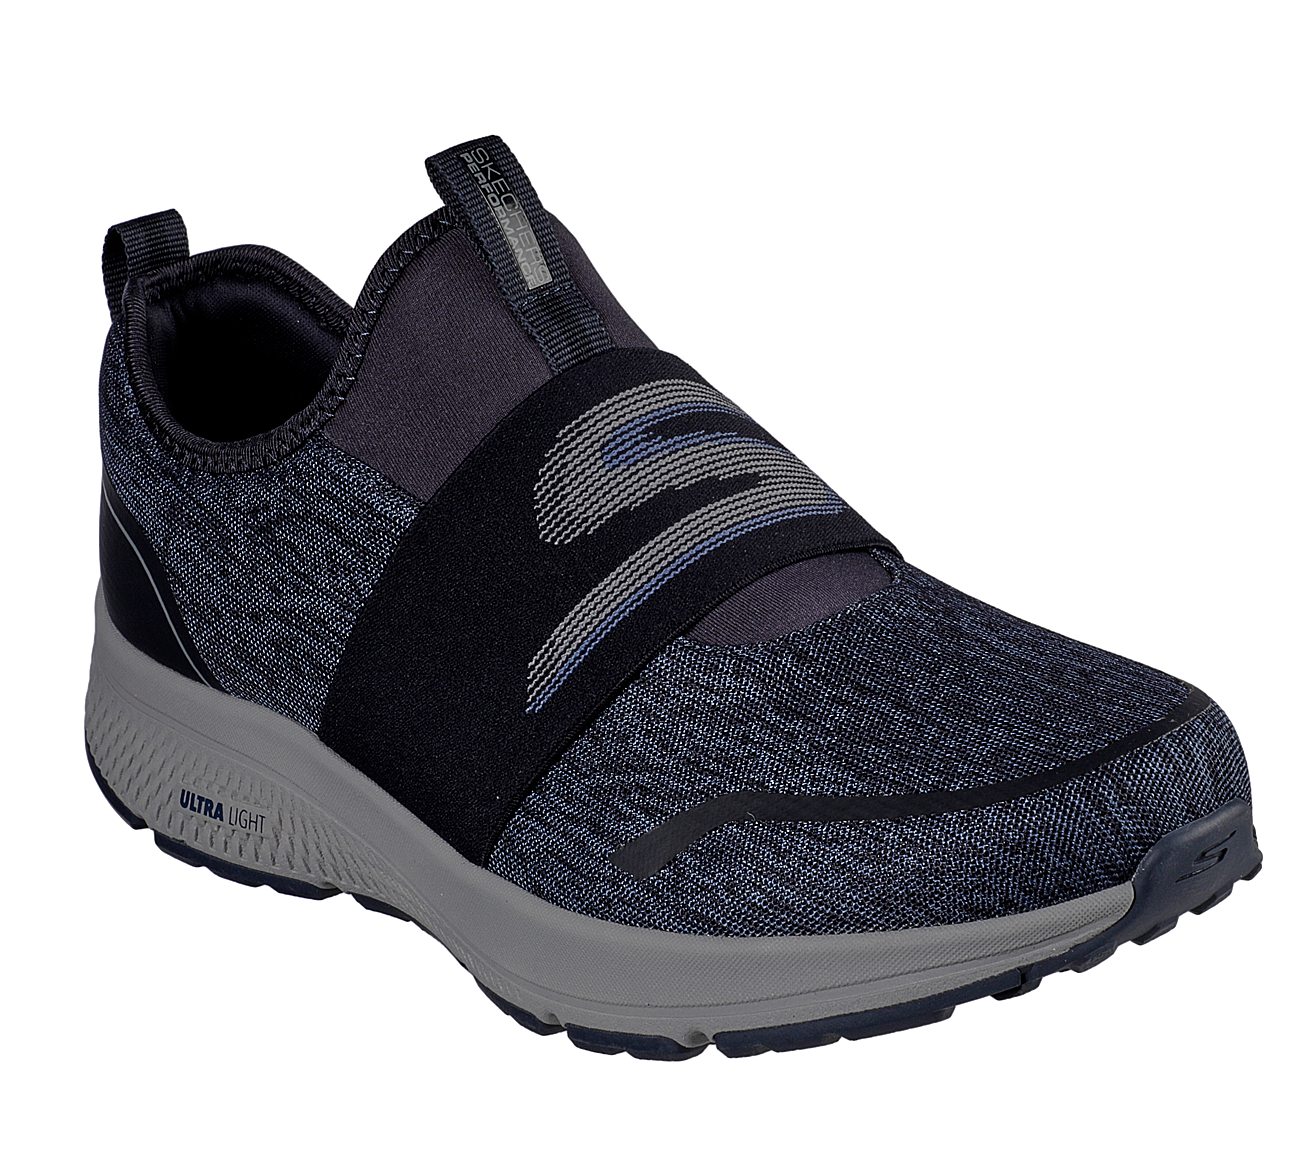 GO RUN CONSISTENT - AMBITION, NAVY/GREY Footwear Lateral View